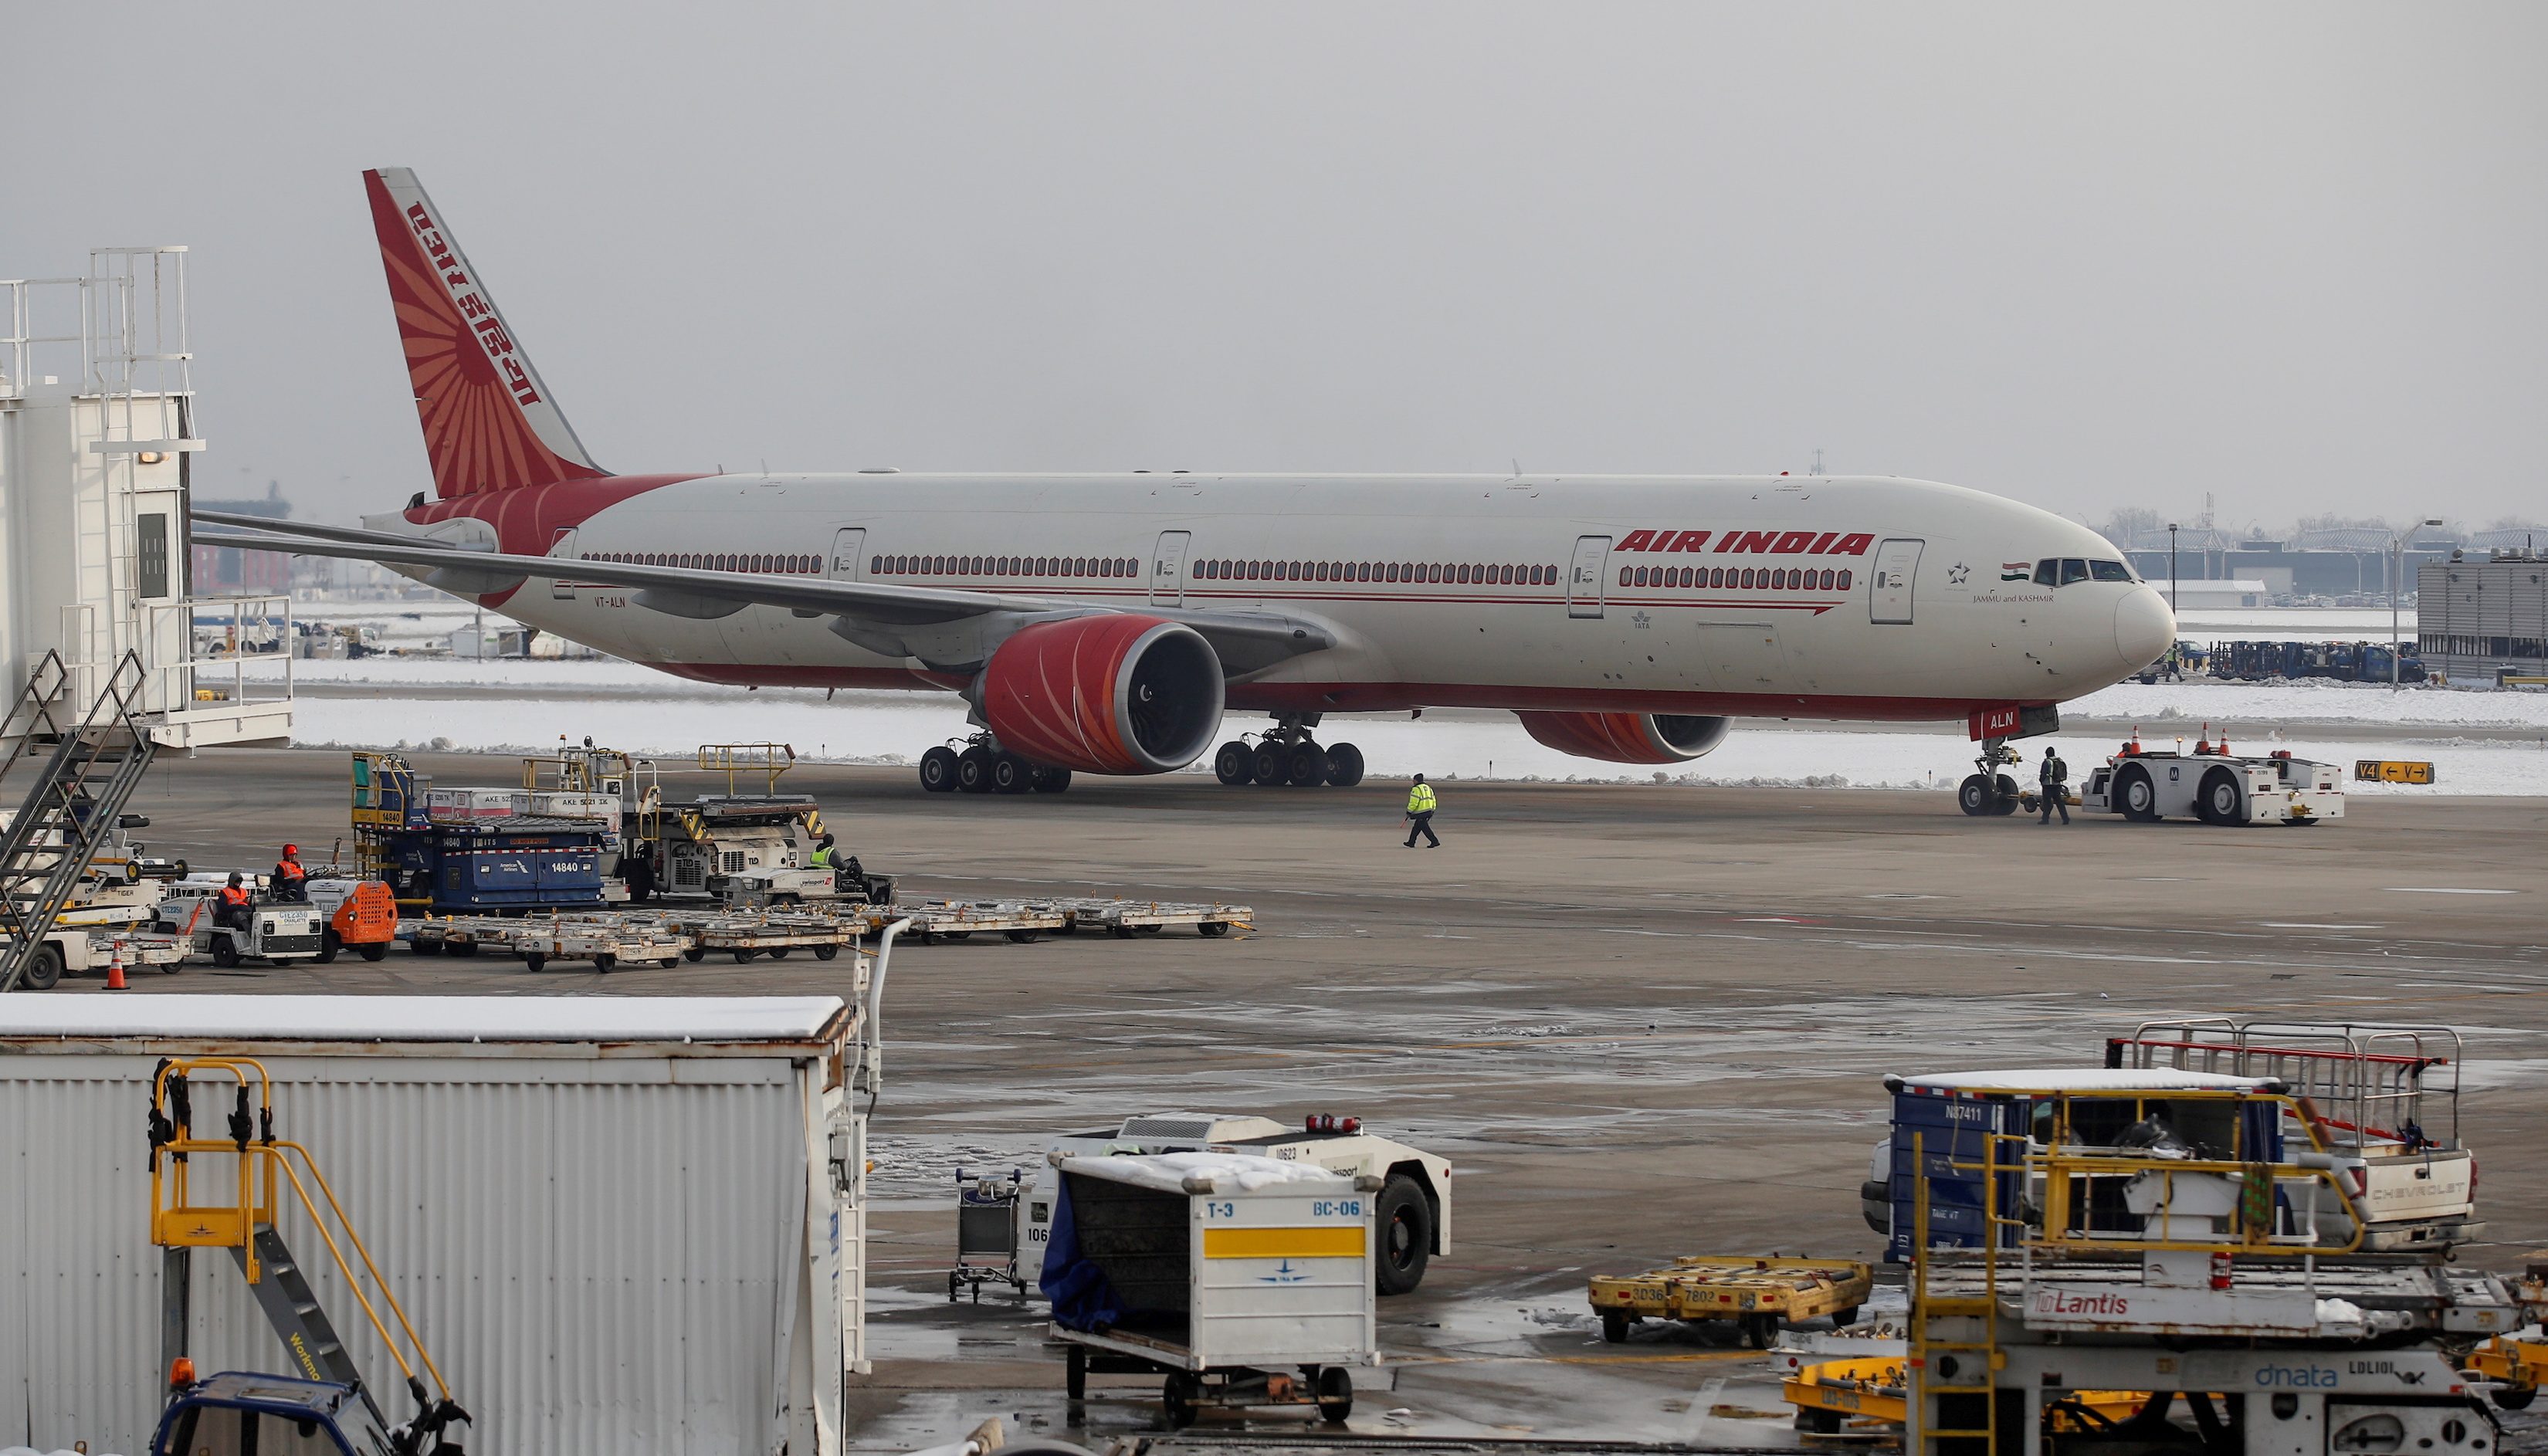 Gov’t says no decision on Air India sale after report cites Tata Sons as winner